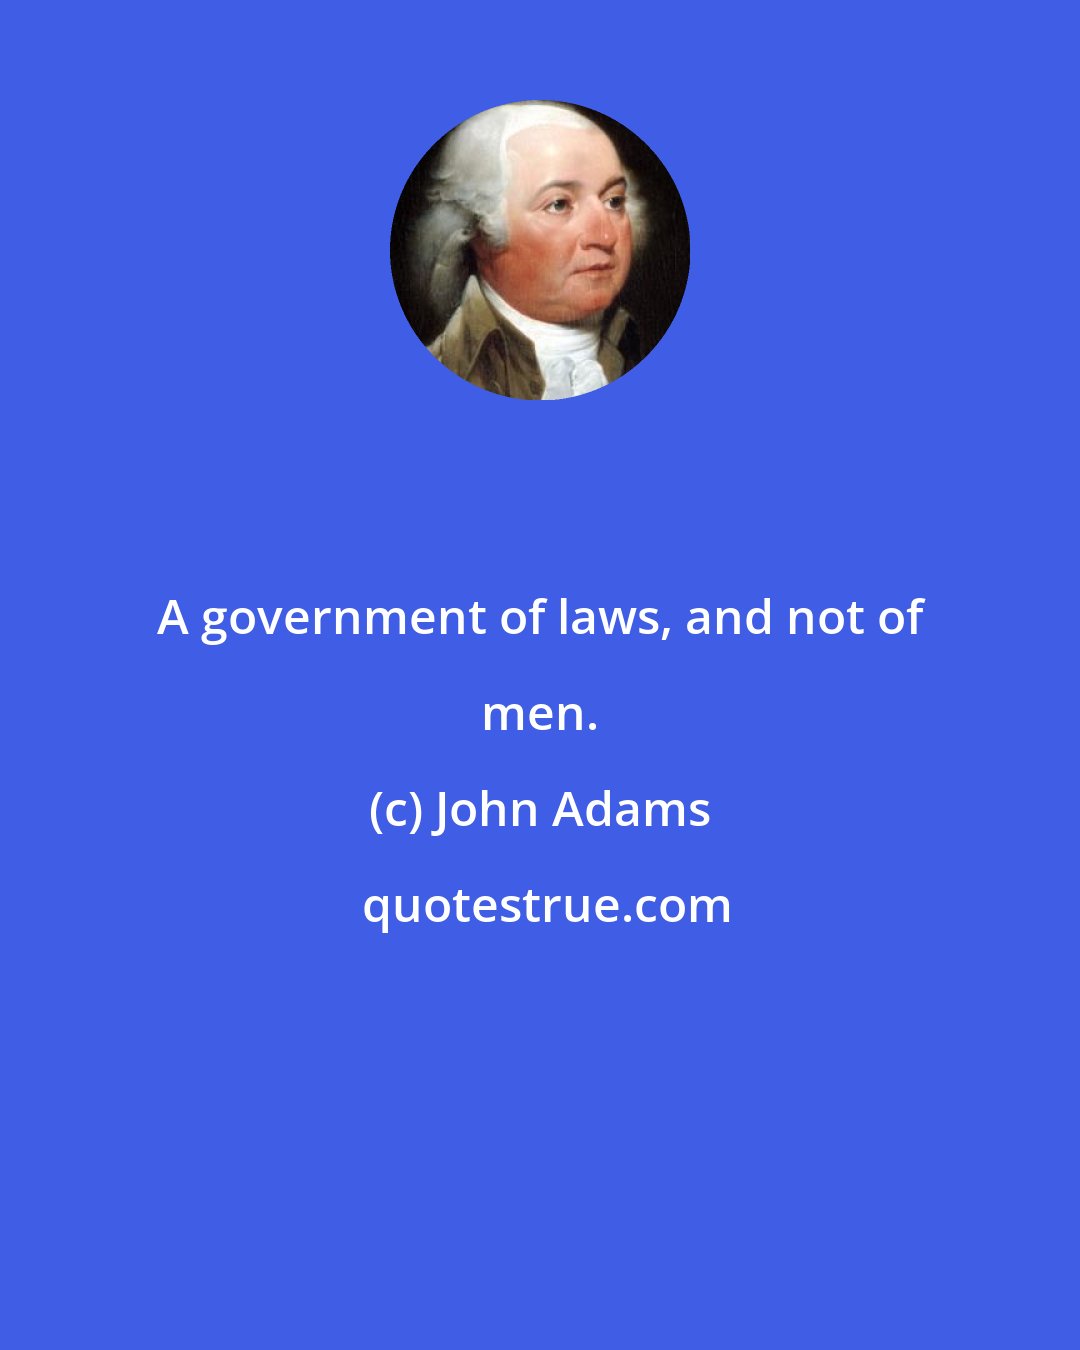 John Adams: A government of laws, and not of men.